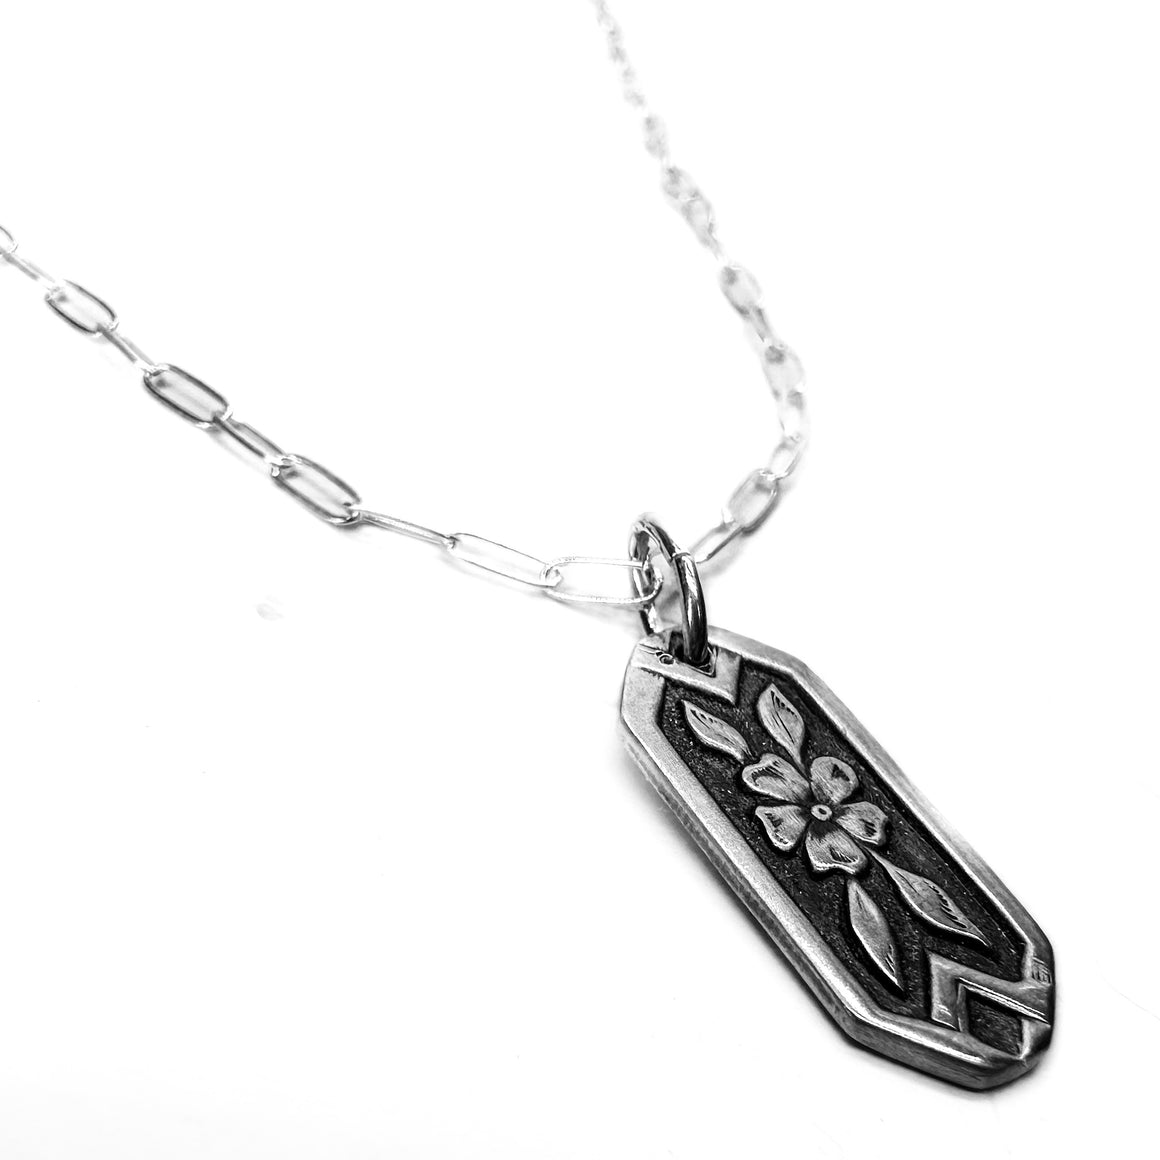 Floral Sterling Silver Pendant Necklace